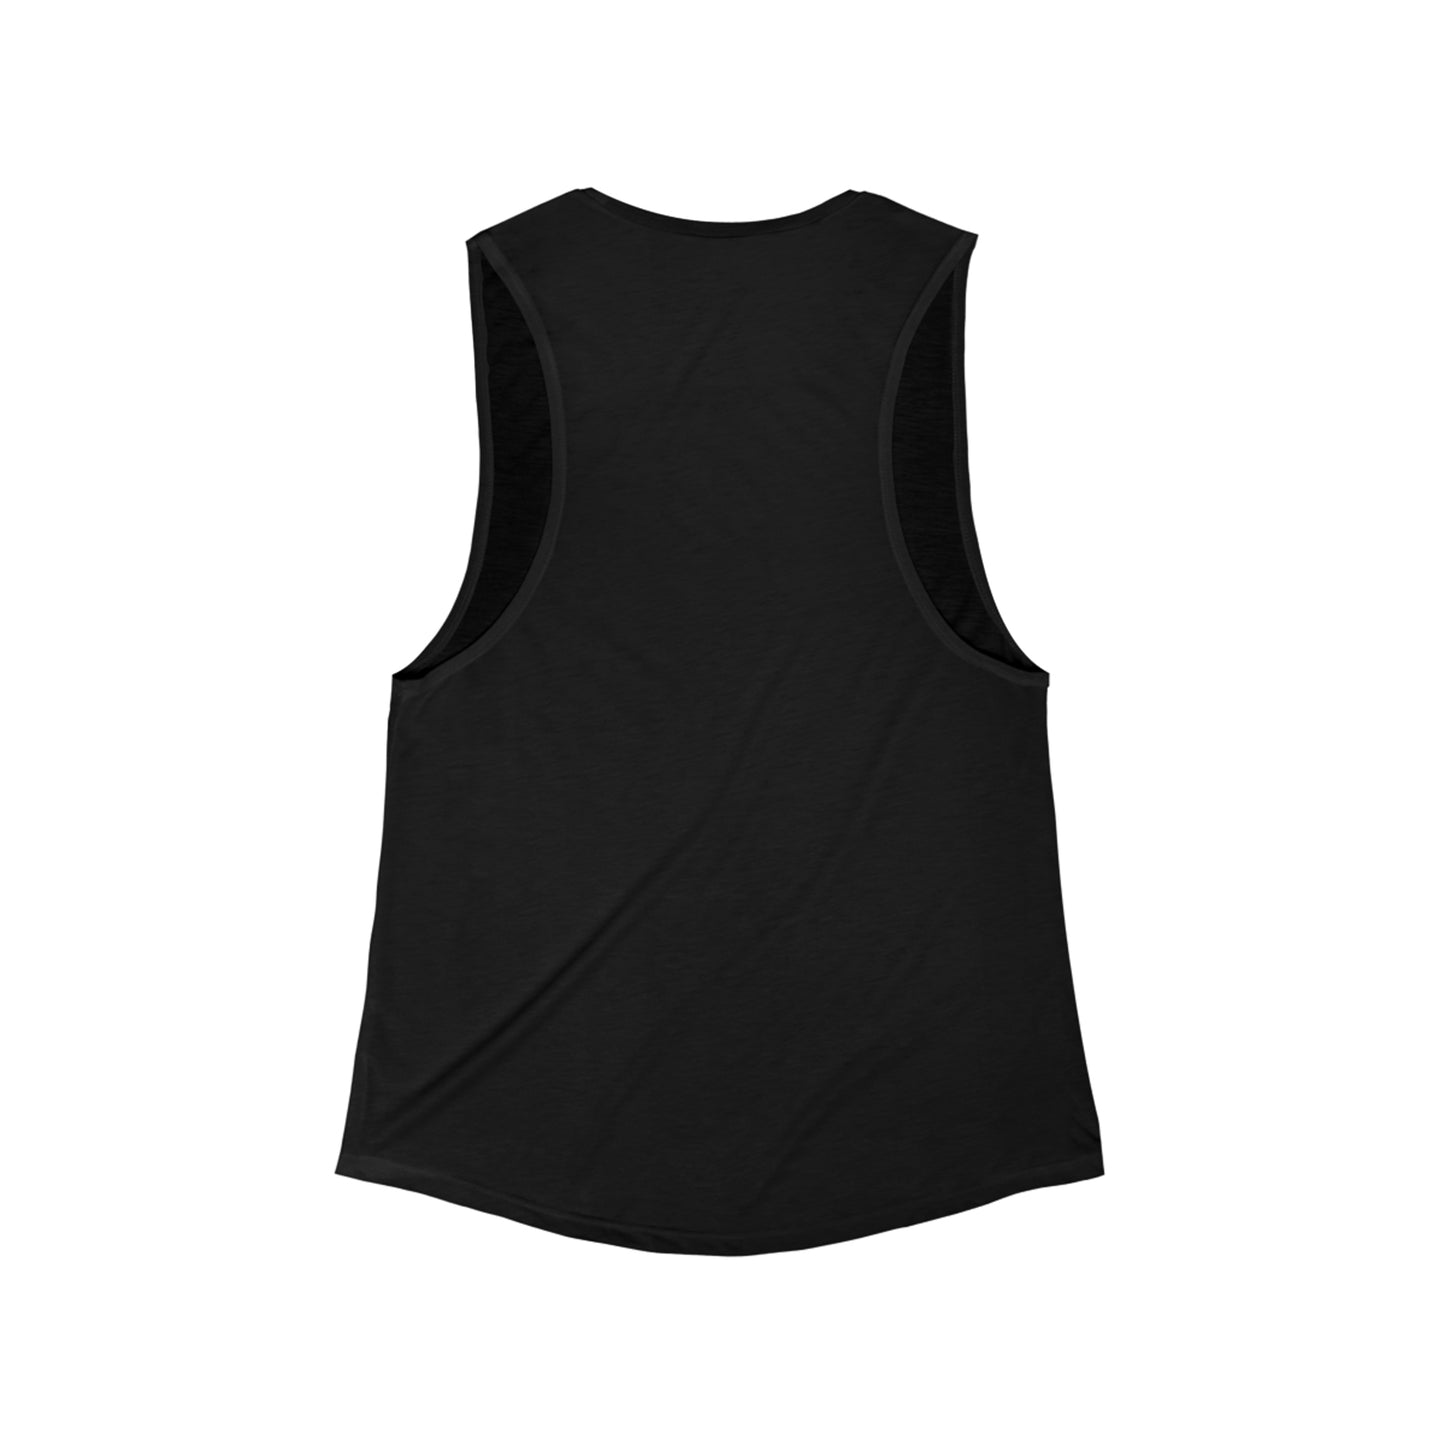 Eat More Chili | BARNEY'S BEANERY - Women's Flowy Scoop Muscle Tank